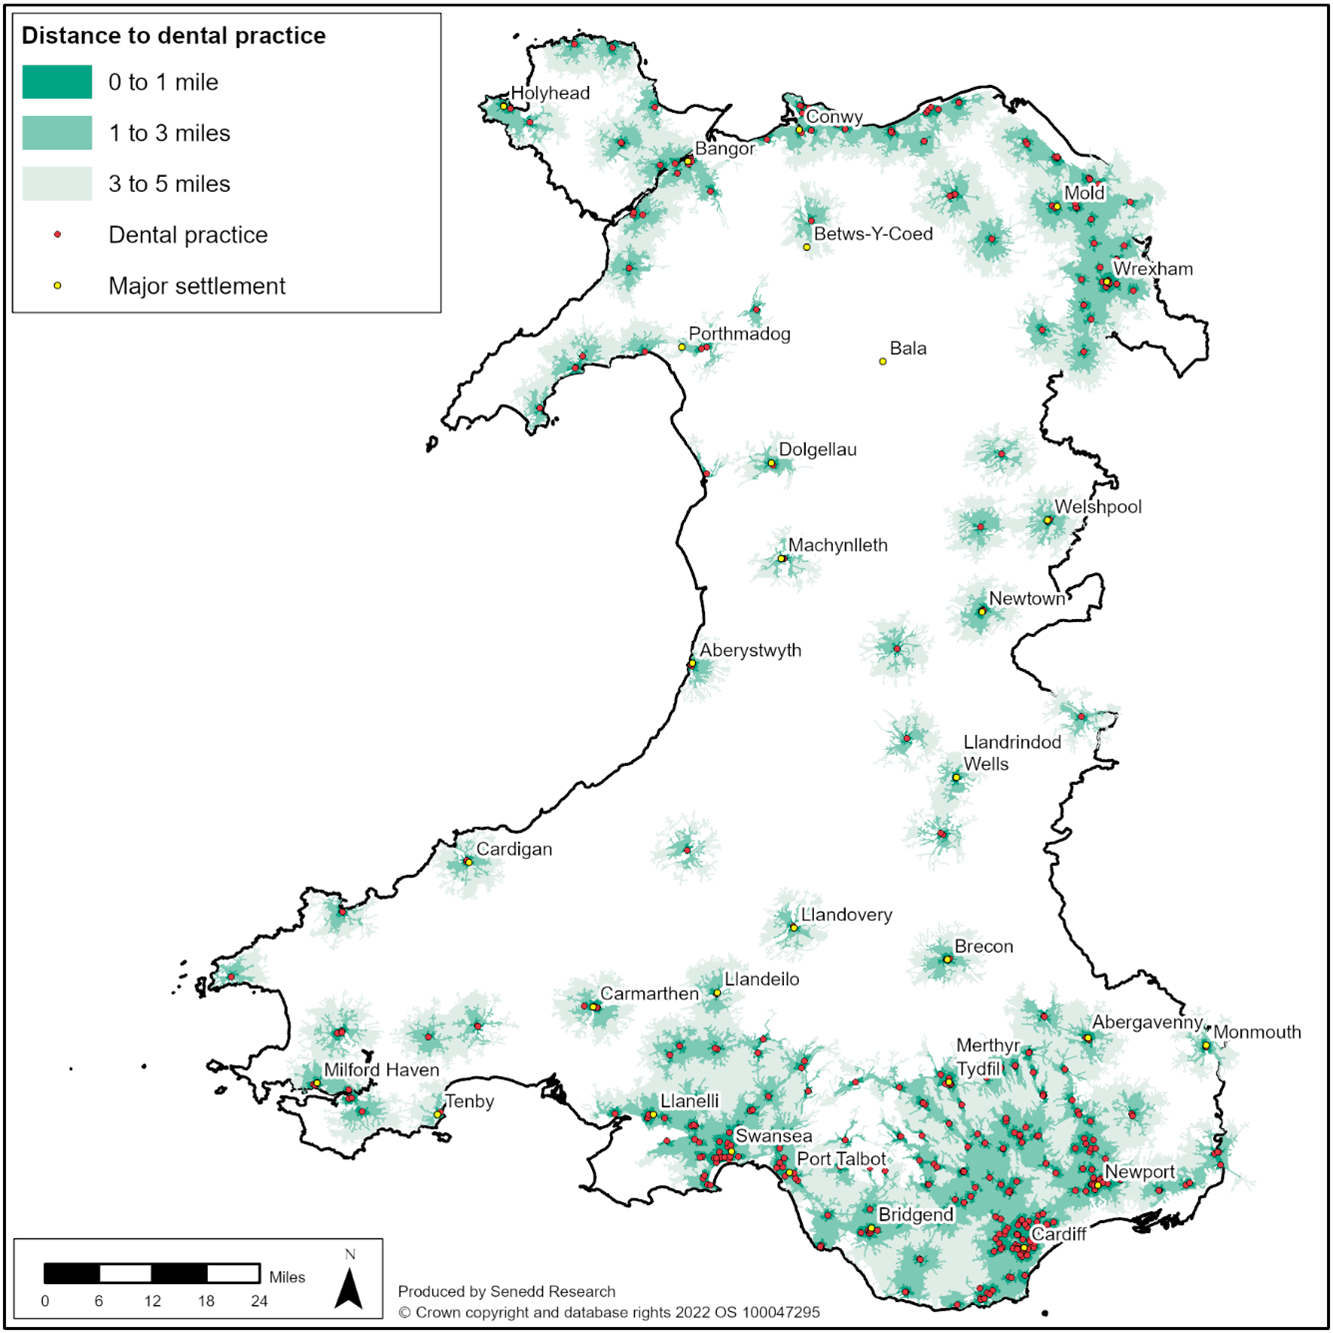 The map shows the location of NHS dental practices in Wales and highlights the area within certain travel distances from them.  There is a greater concentration of dental practices in South Wales and along the North Wales coast.  Dental practices are sparsely distributed across Mid Wales.